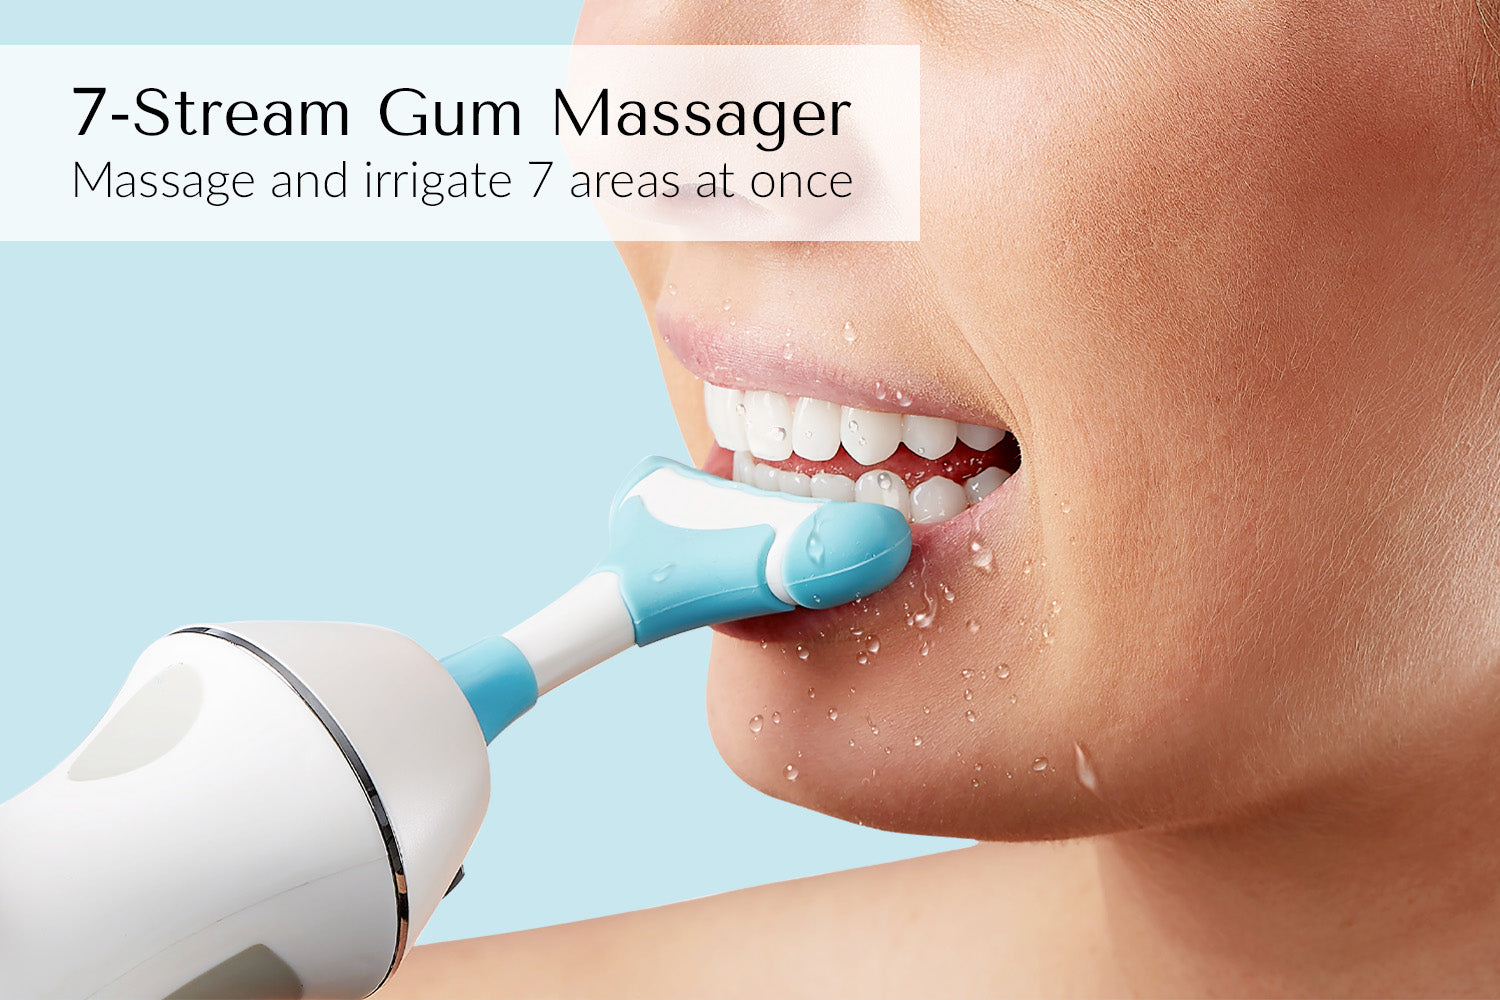 New, unique, seven stream gum massager by ToothShower, no where else can you find such a device to water floss seven spaces at one time. Great for braces, teens or those in a hurry and just dont take the time to floss. 